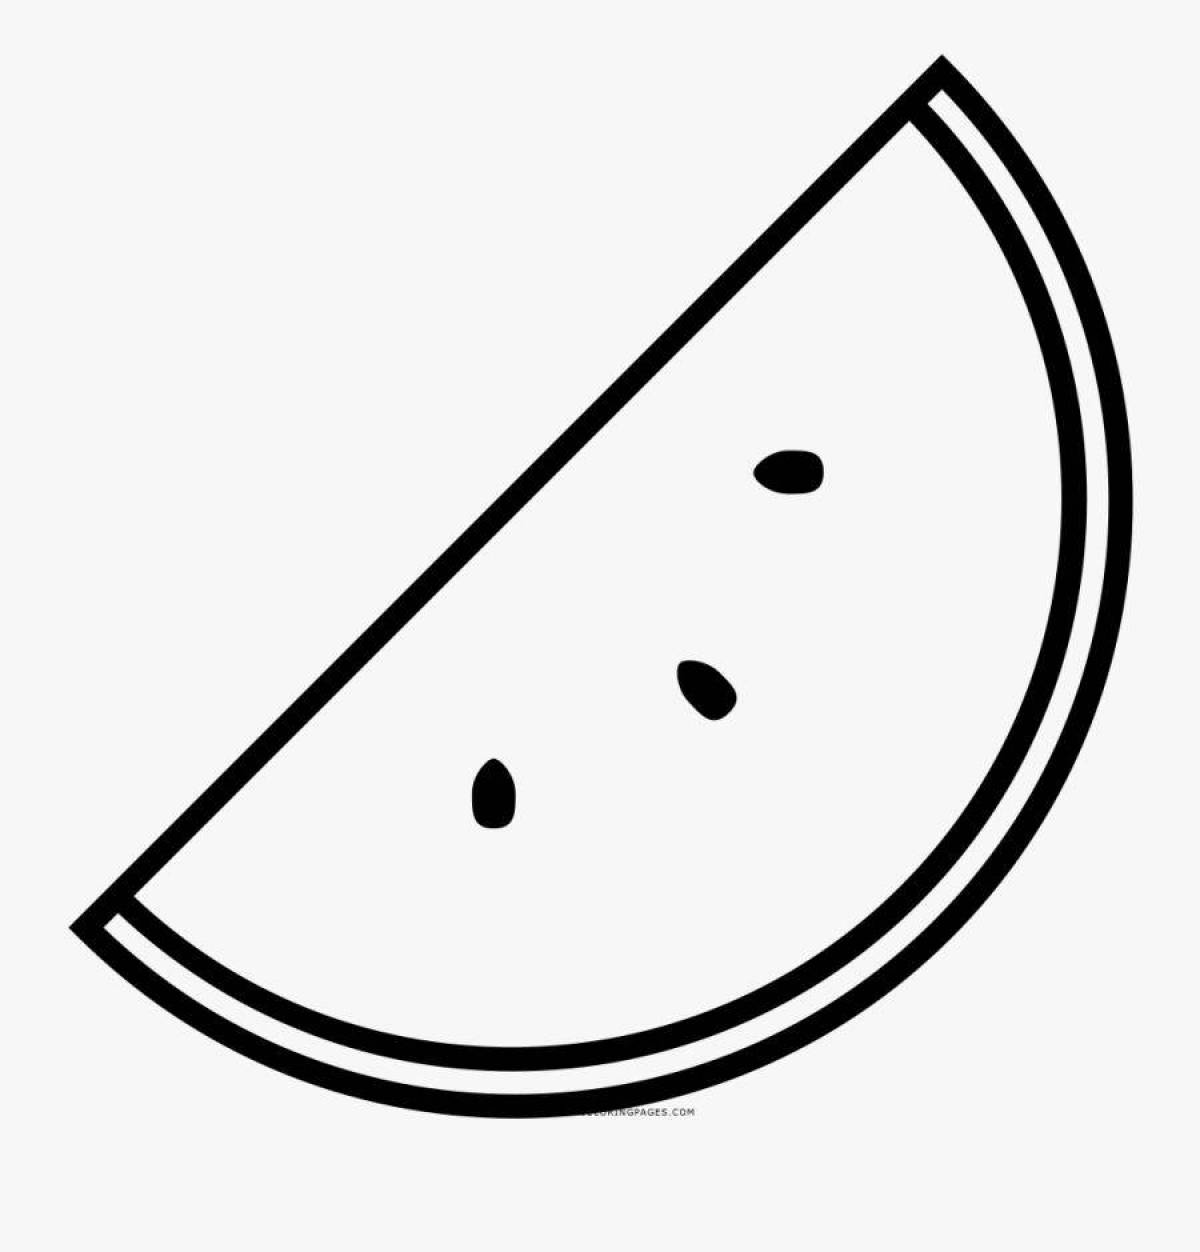 Coloring pages with watermelons